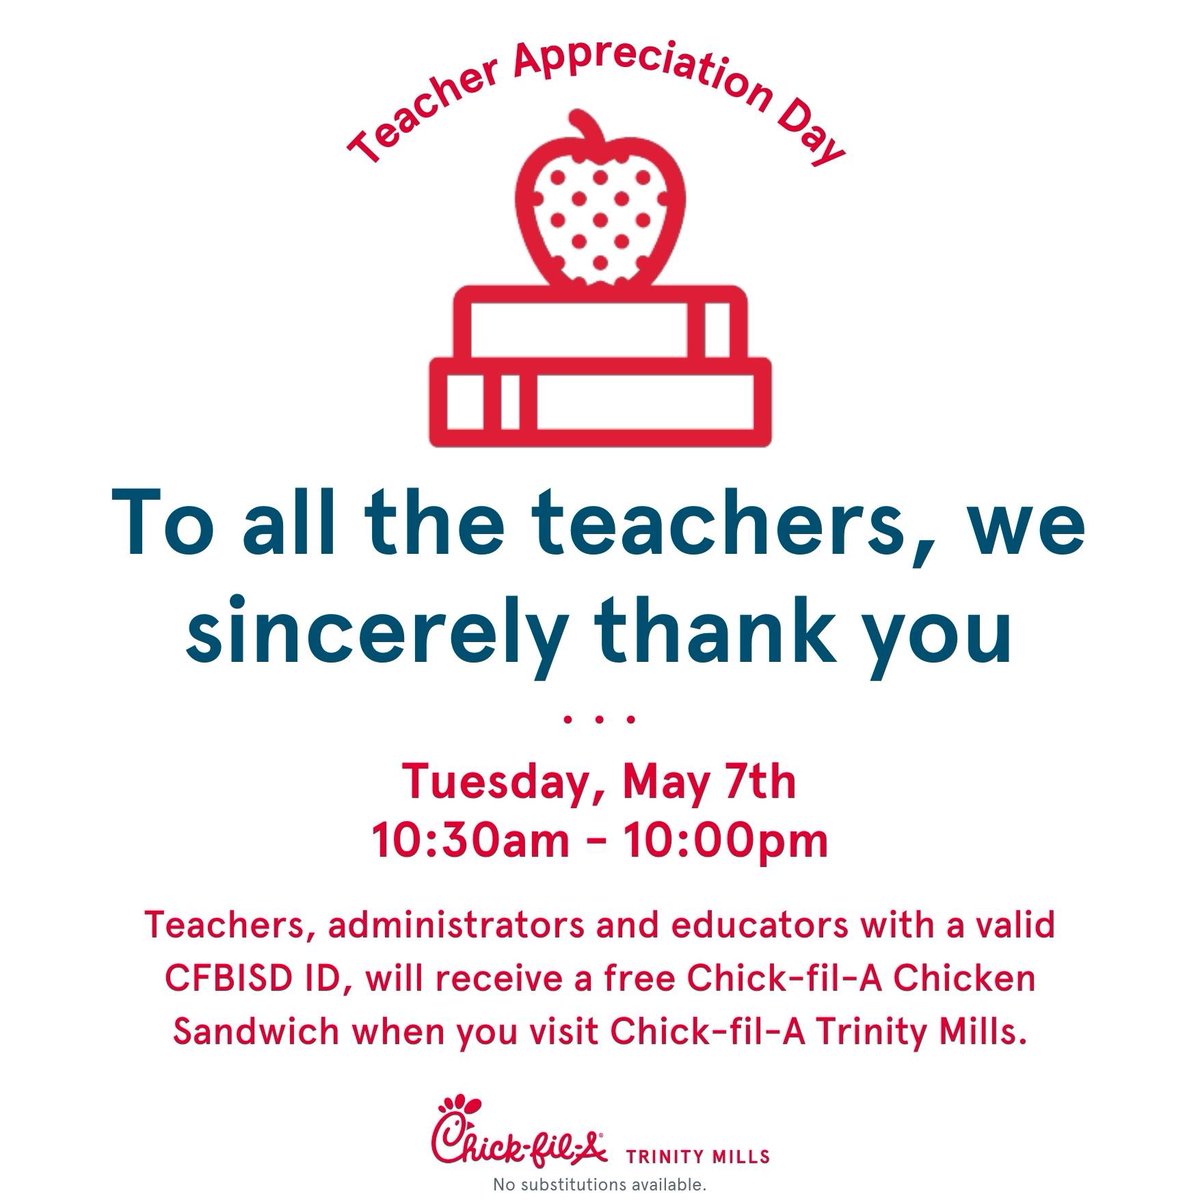 ✔️Mark your calendar 🗓️ ✔️Thank you Chick-fil-A Trinity Mills (2425 Old Denton Rd, Carrollton, TX) for supporting our @CFBISD teachers, educators and staff! Tuesday is the day for a #freechickfila🍎 Bring your CFBISD ID to redeem ❤️ #TeacherAppreciationWeek